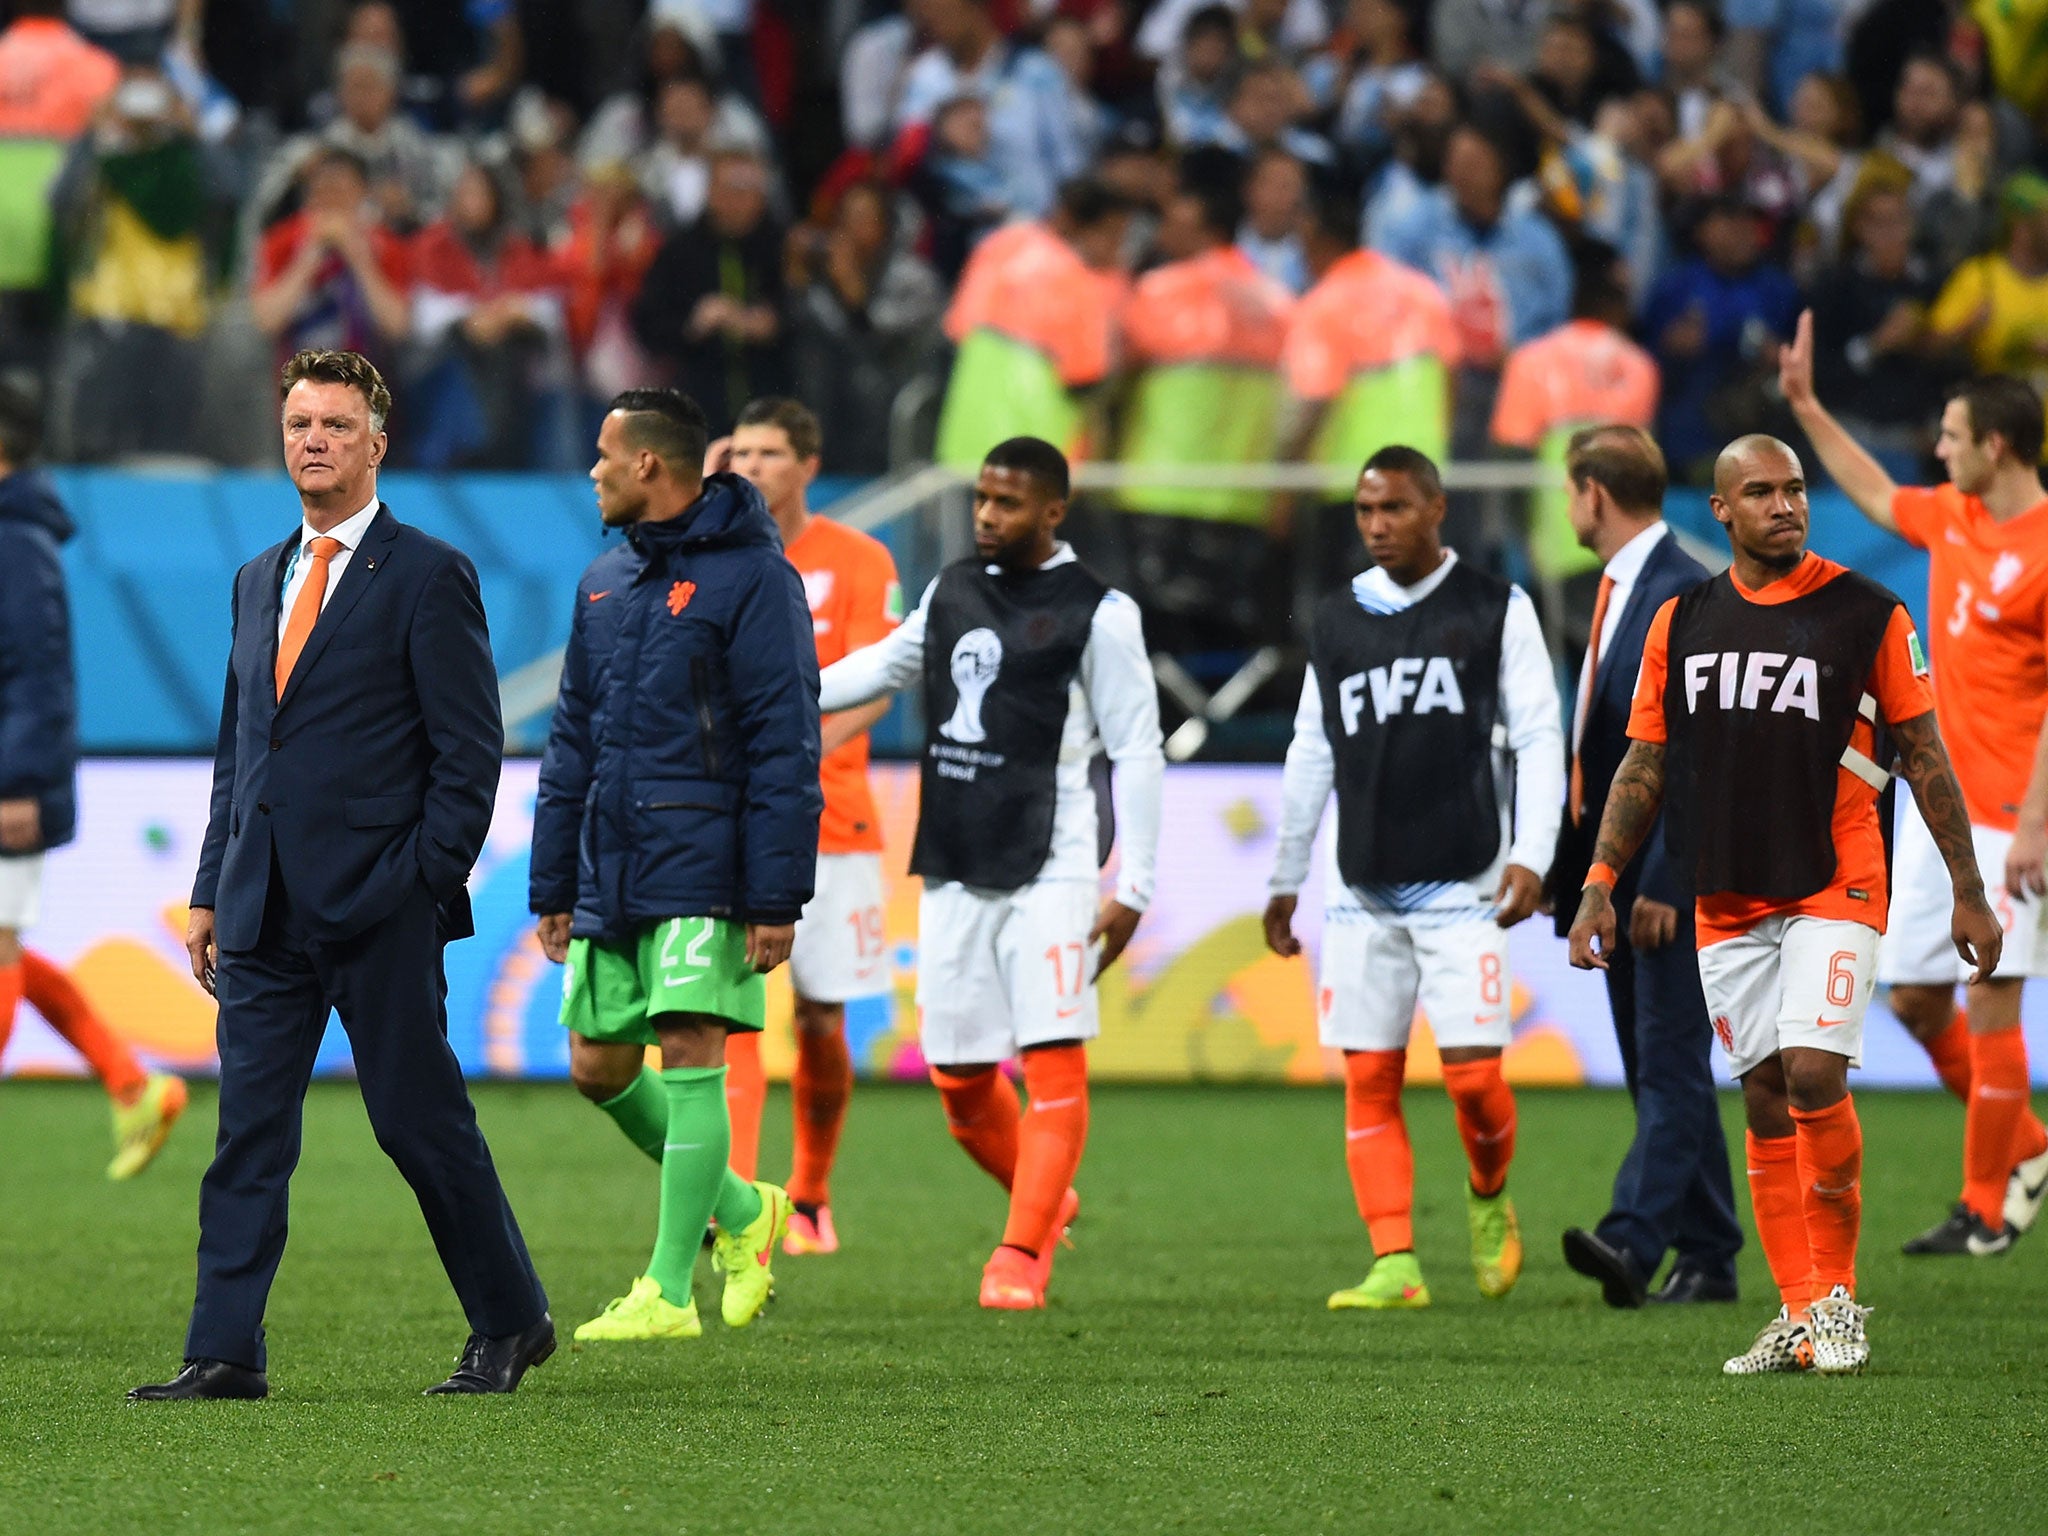 Head coach Louis van Gaal of the Netherlands looks on with his team after being defeated by Argentina in a penalty shootout during the 2014 FIFA World Cup Brazil Semi Finals